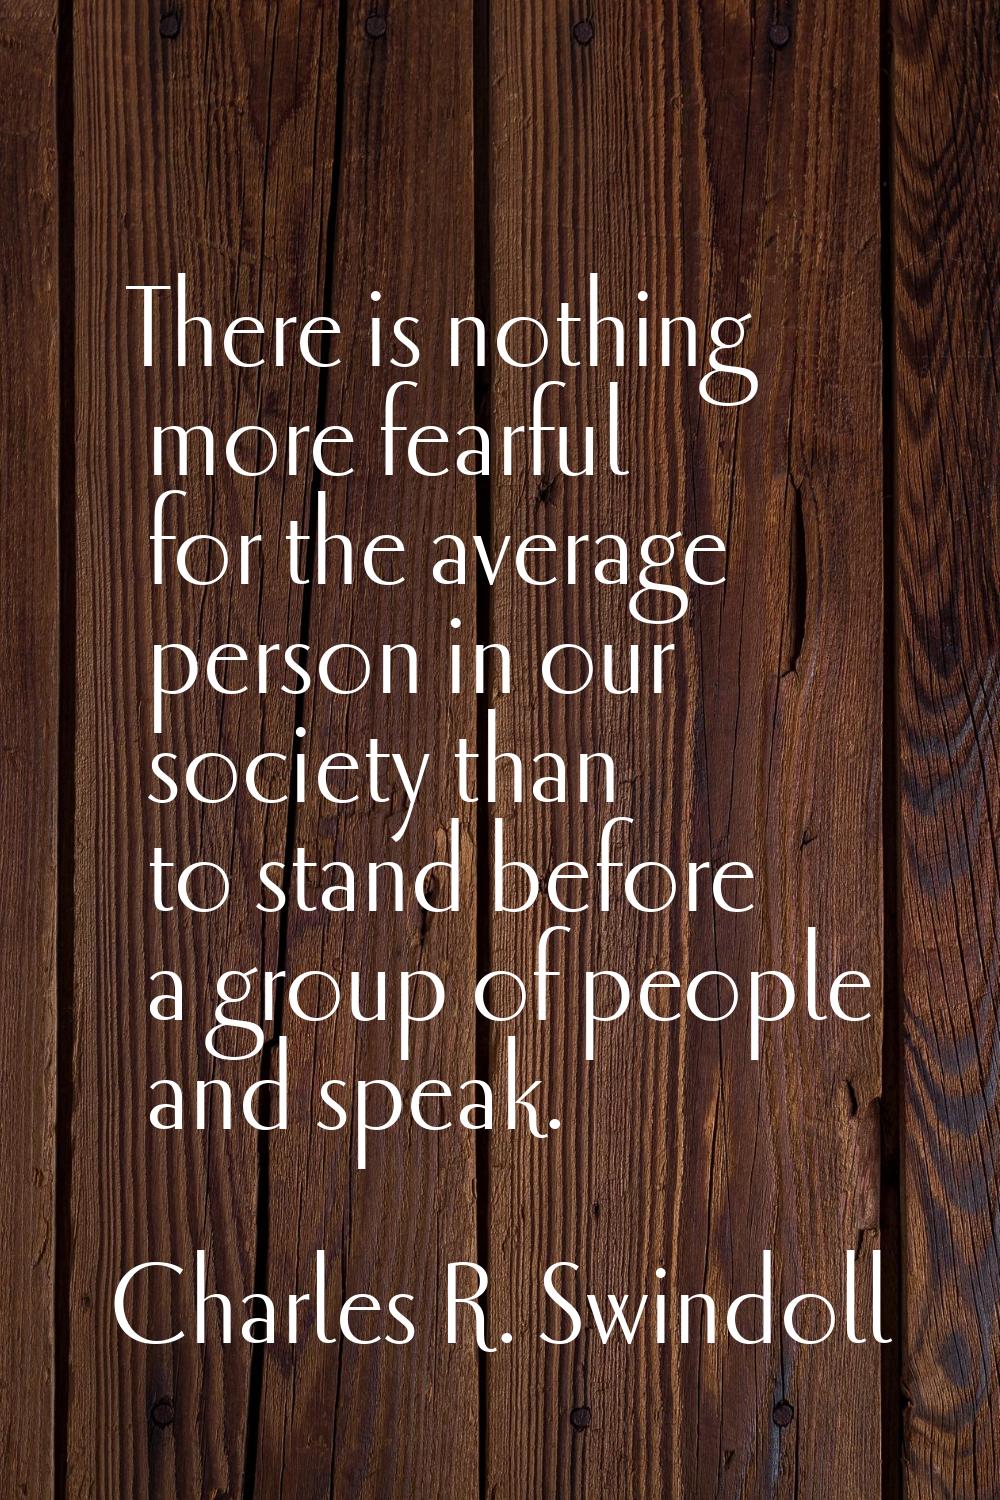 There is nothing more fearful for the average person in our society than to stand before a group of